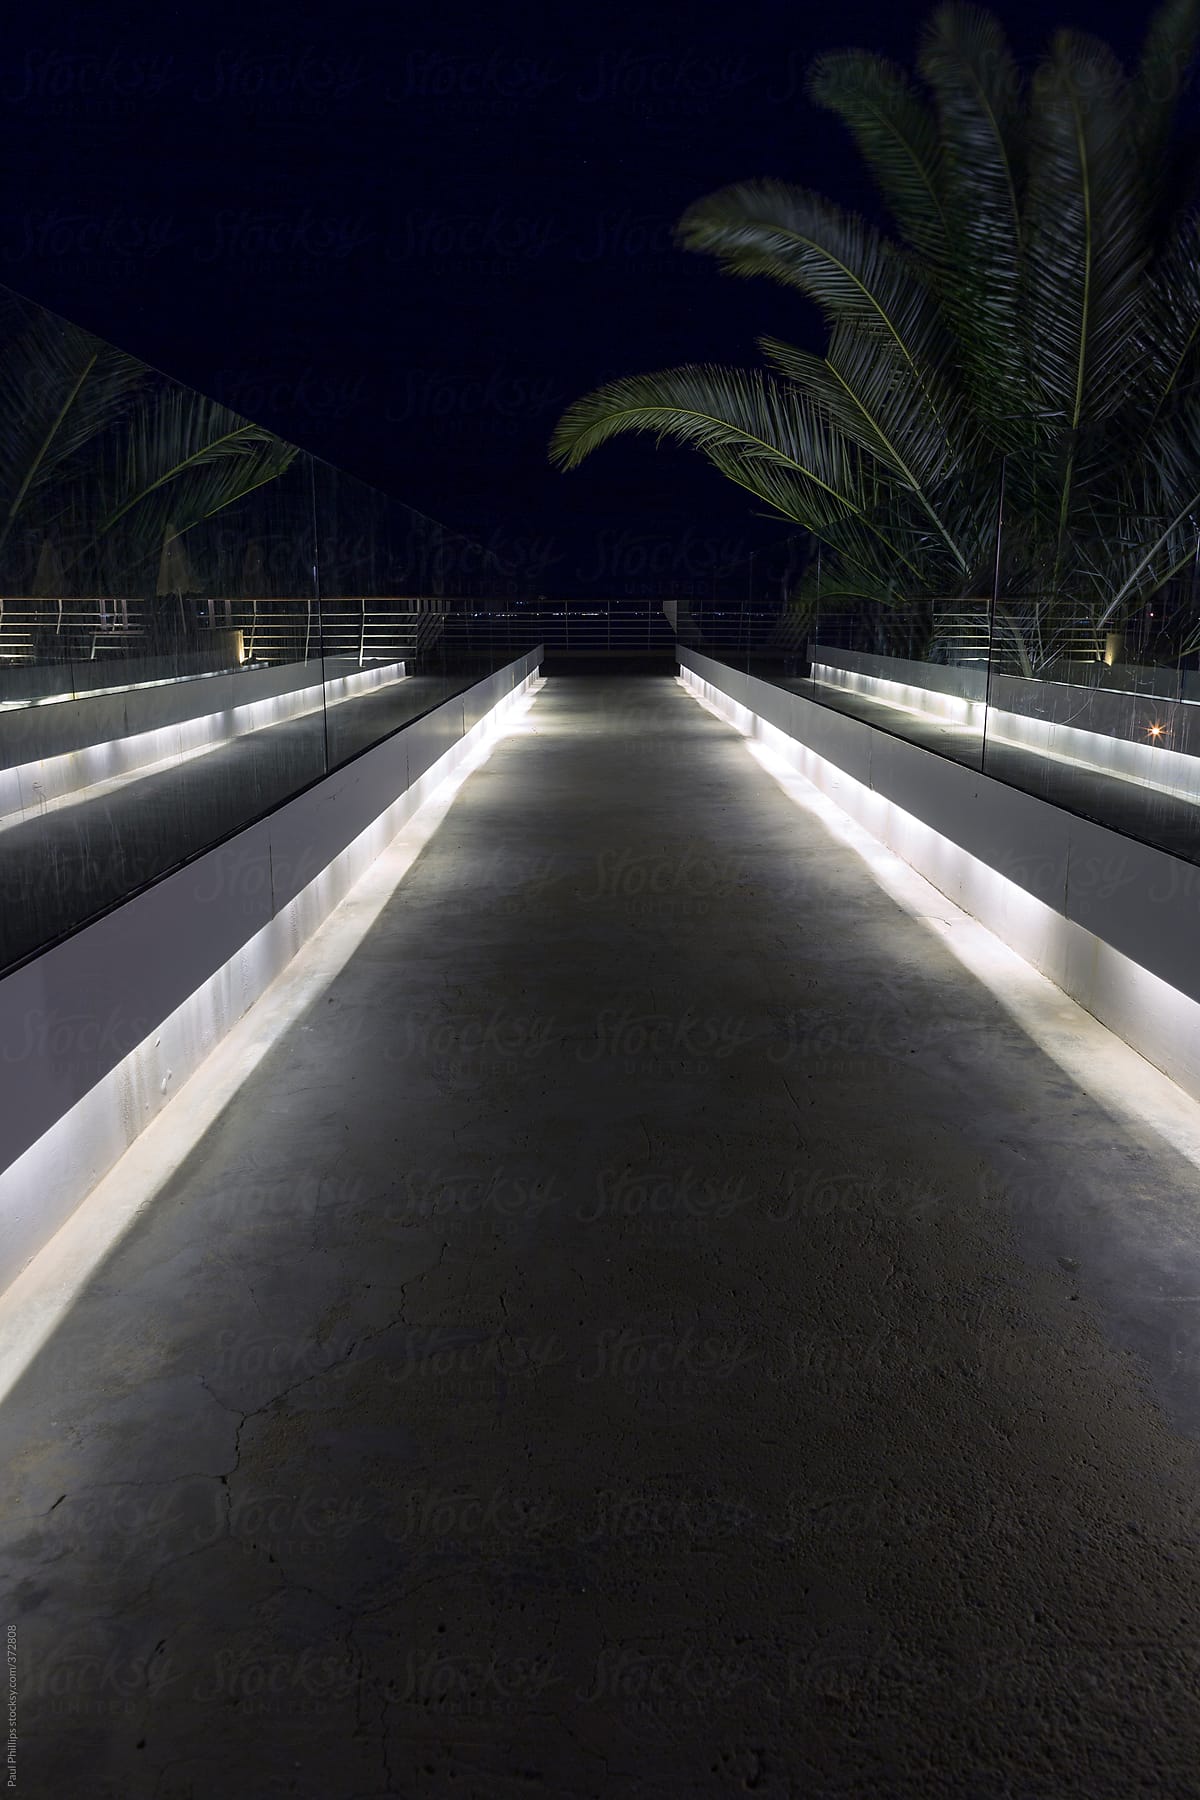 Illuminated walkway at night tapering off towards the end. Glass barrier on either side